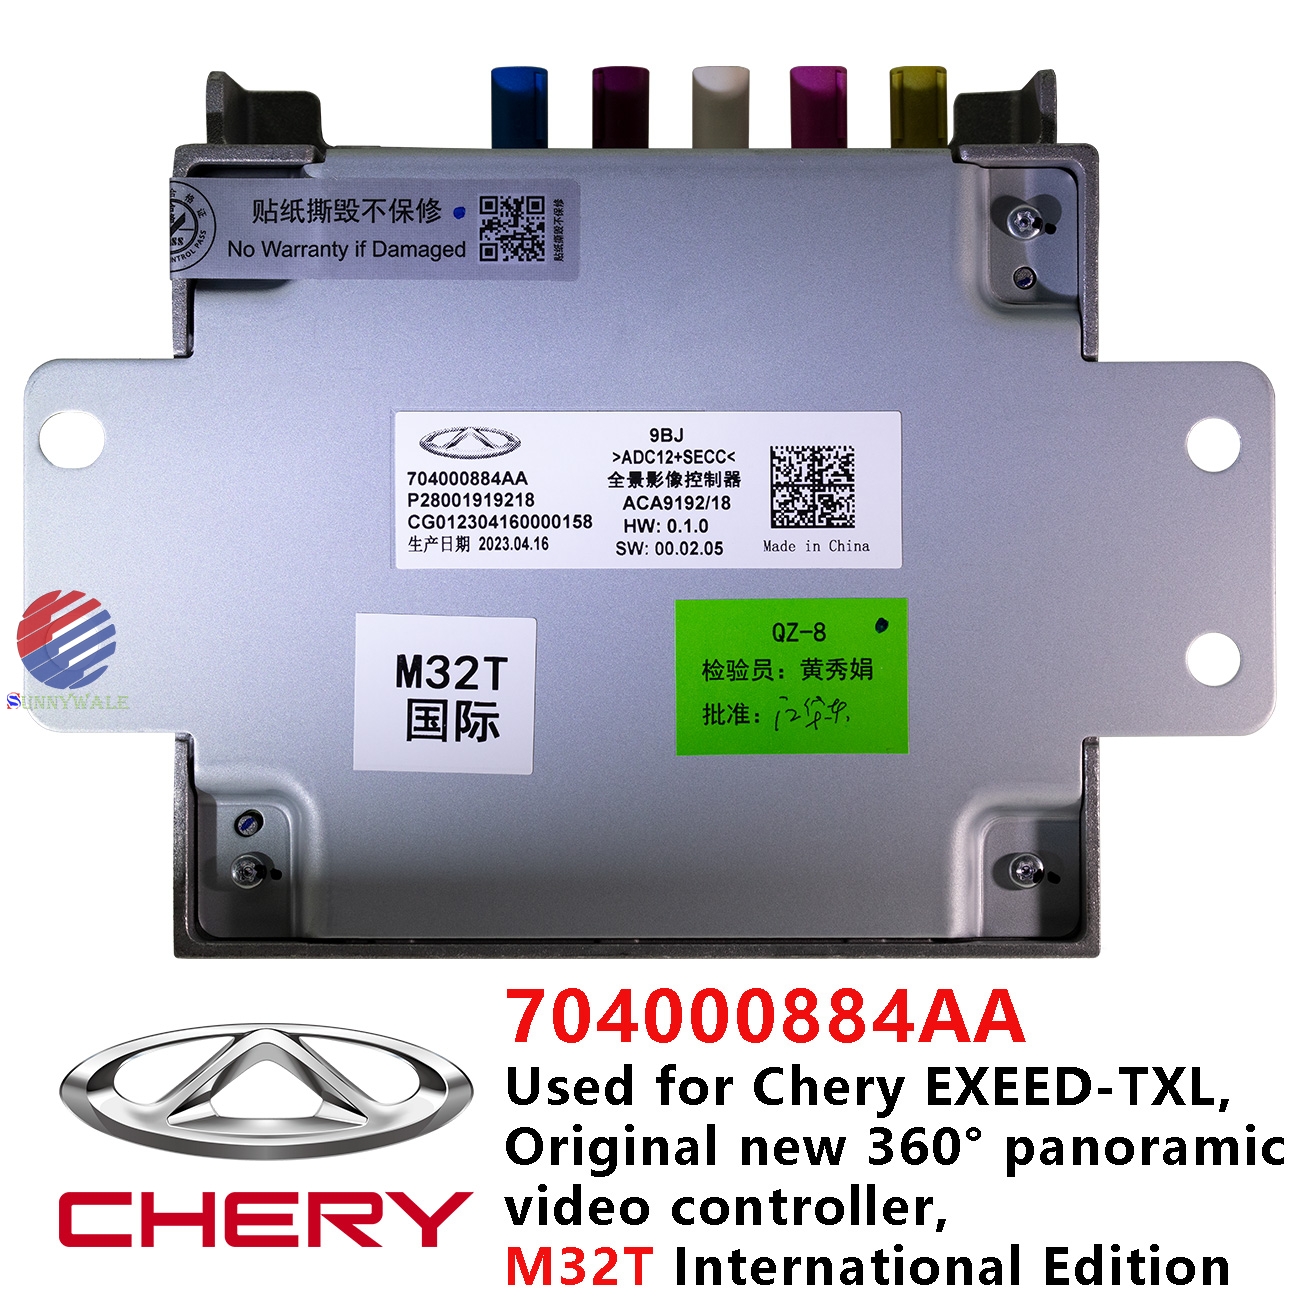 original and new, Chery automobile parts, Chery EXEED recorder, EXEED-TXL reversing image, EXEED SUV reversing rearview, 360° reversing image, panoramic image controller, M32T international edition, part number: 704000884AA，Car circumferential image system controller